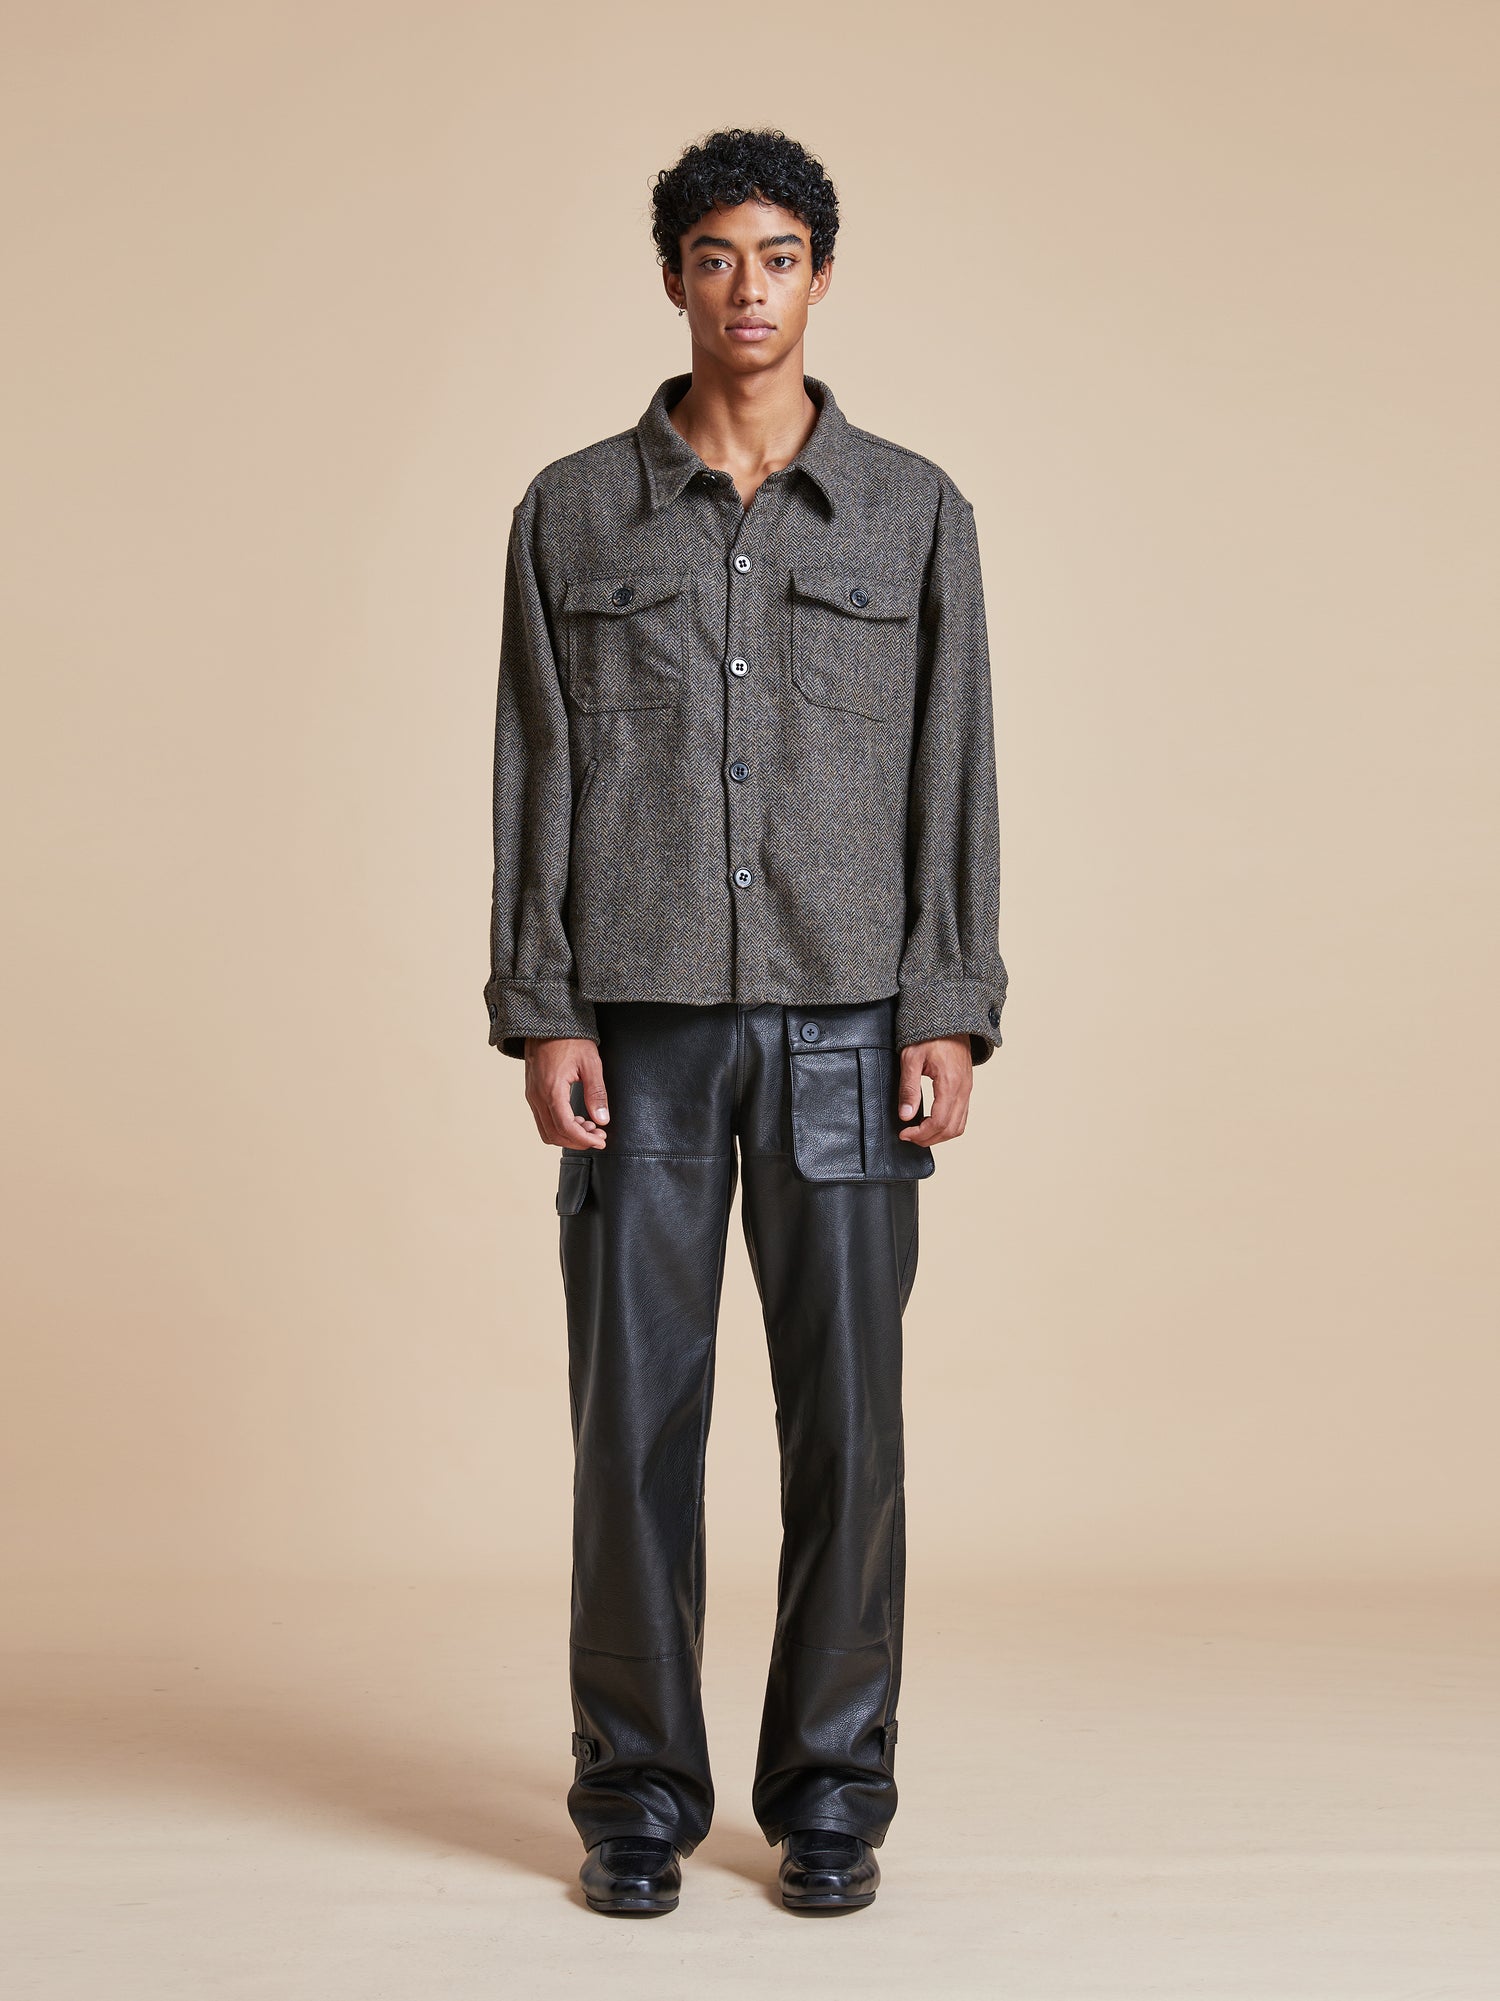 The model is wearing a Raven Herringbone Overshirt by Found and leather pants.